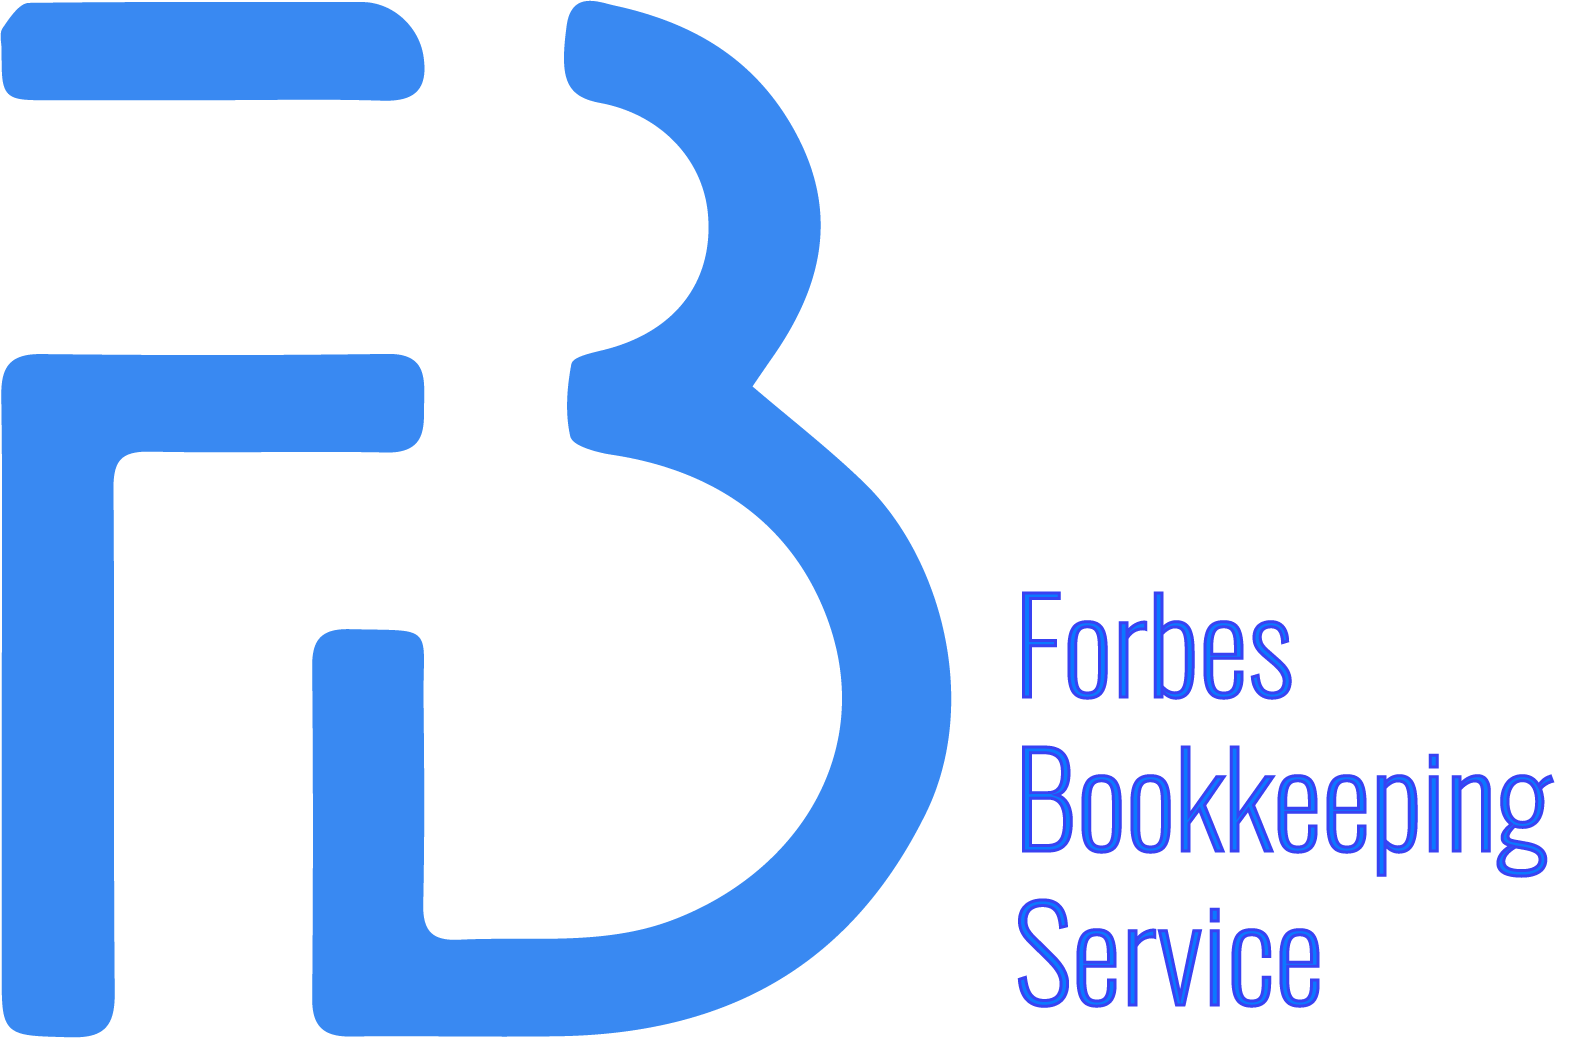 Forbes Bookkeeping Service 2